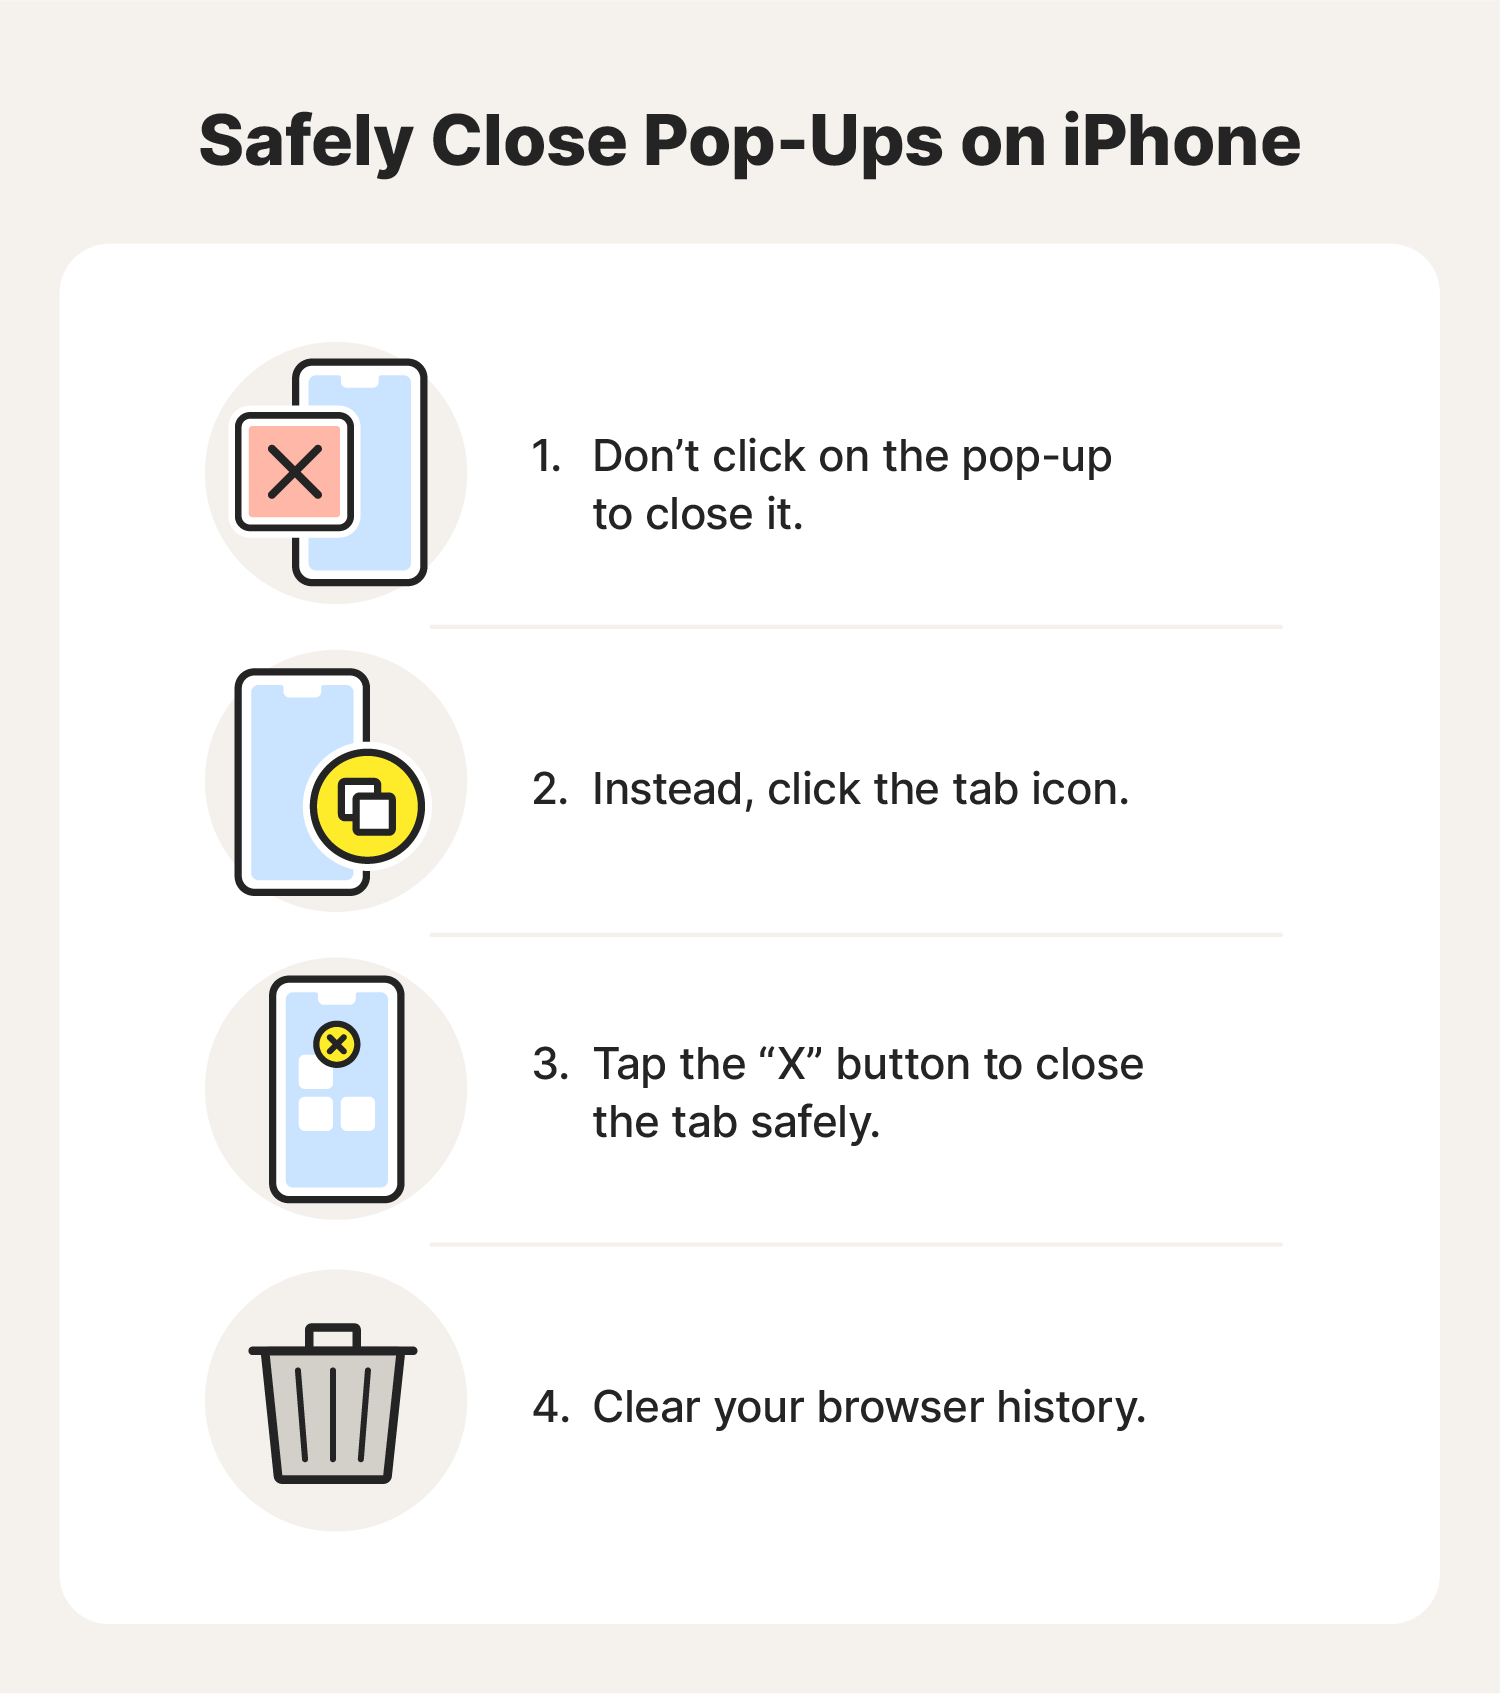 An image shows how to safely close pop-ups on an iPhone to prevent viruses.